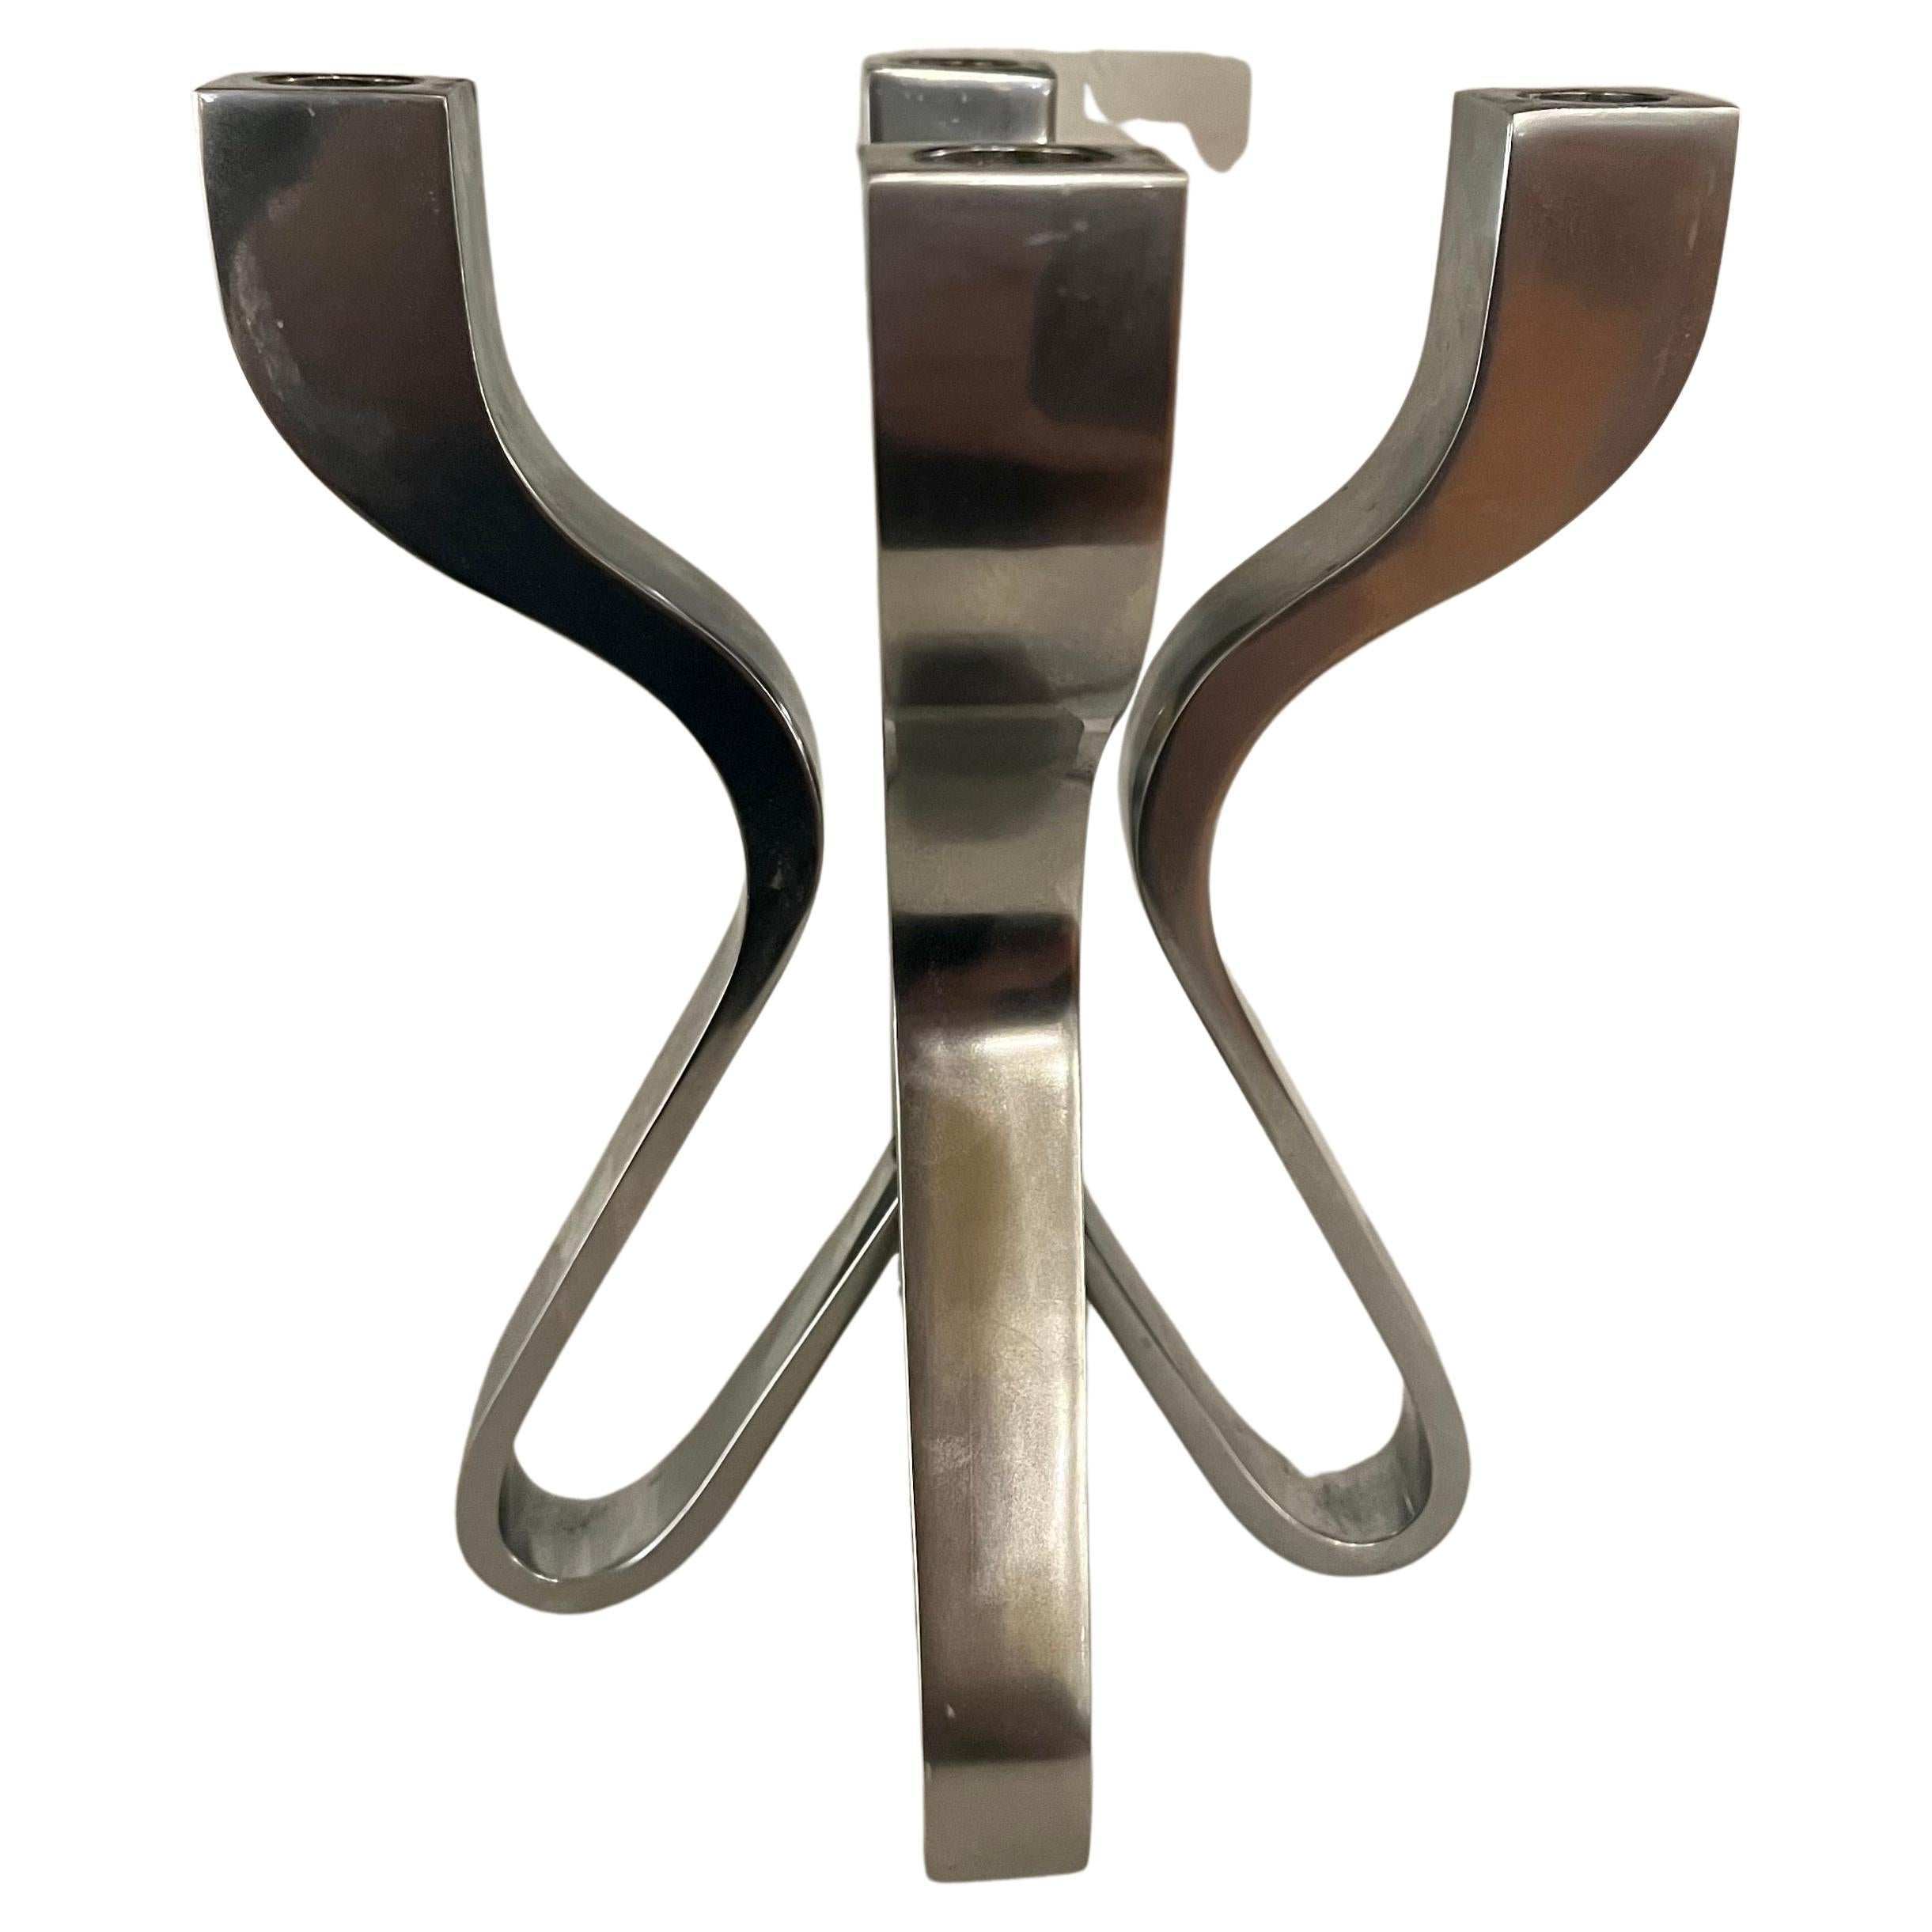 Striking candelabra. Described by their designer, Karim Rashid, as “sensual minimalism”, solid sleek awe-inspiring pieces of decorative art. Comprised of die-cast zinc with matte chrome plating. Rashid has been deemed one of the most prolific